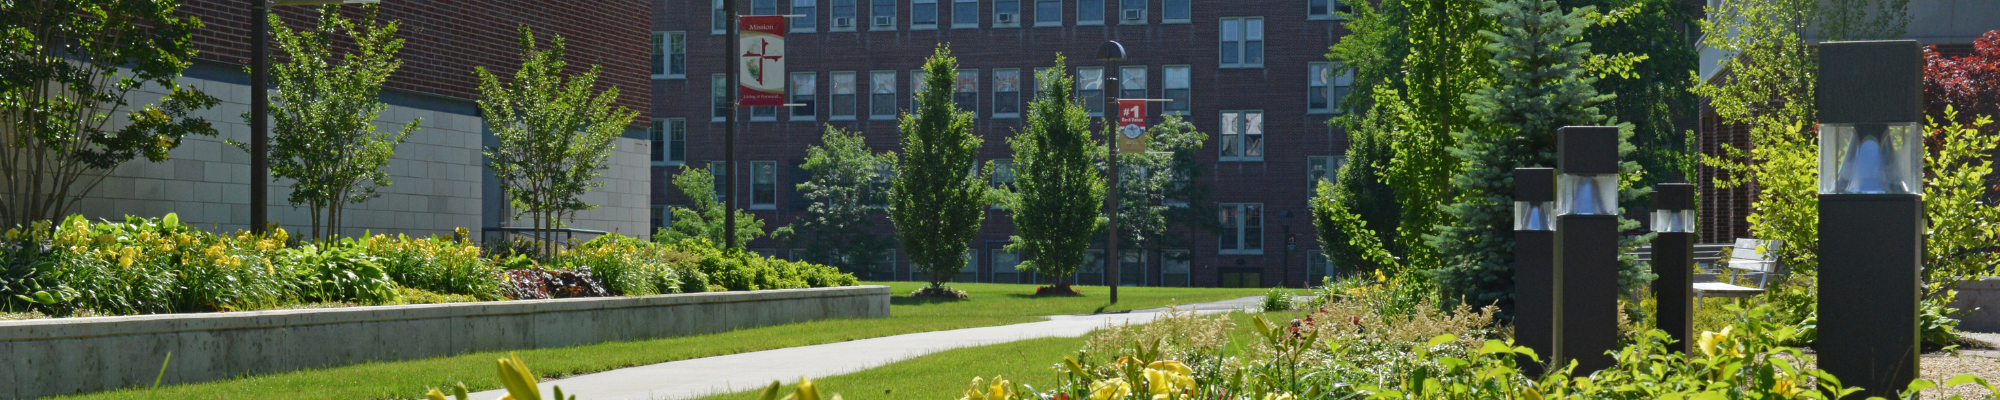 shot of molloy college's campus. there is lots of greenery and flowers. it is a sunny day.